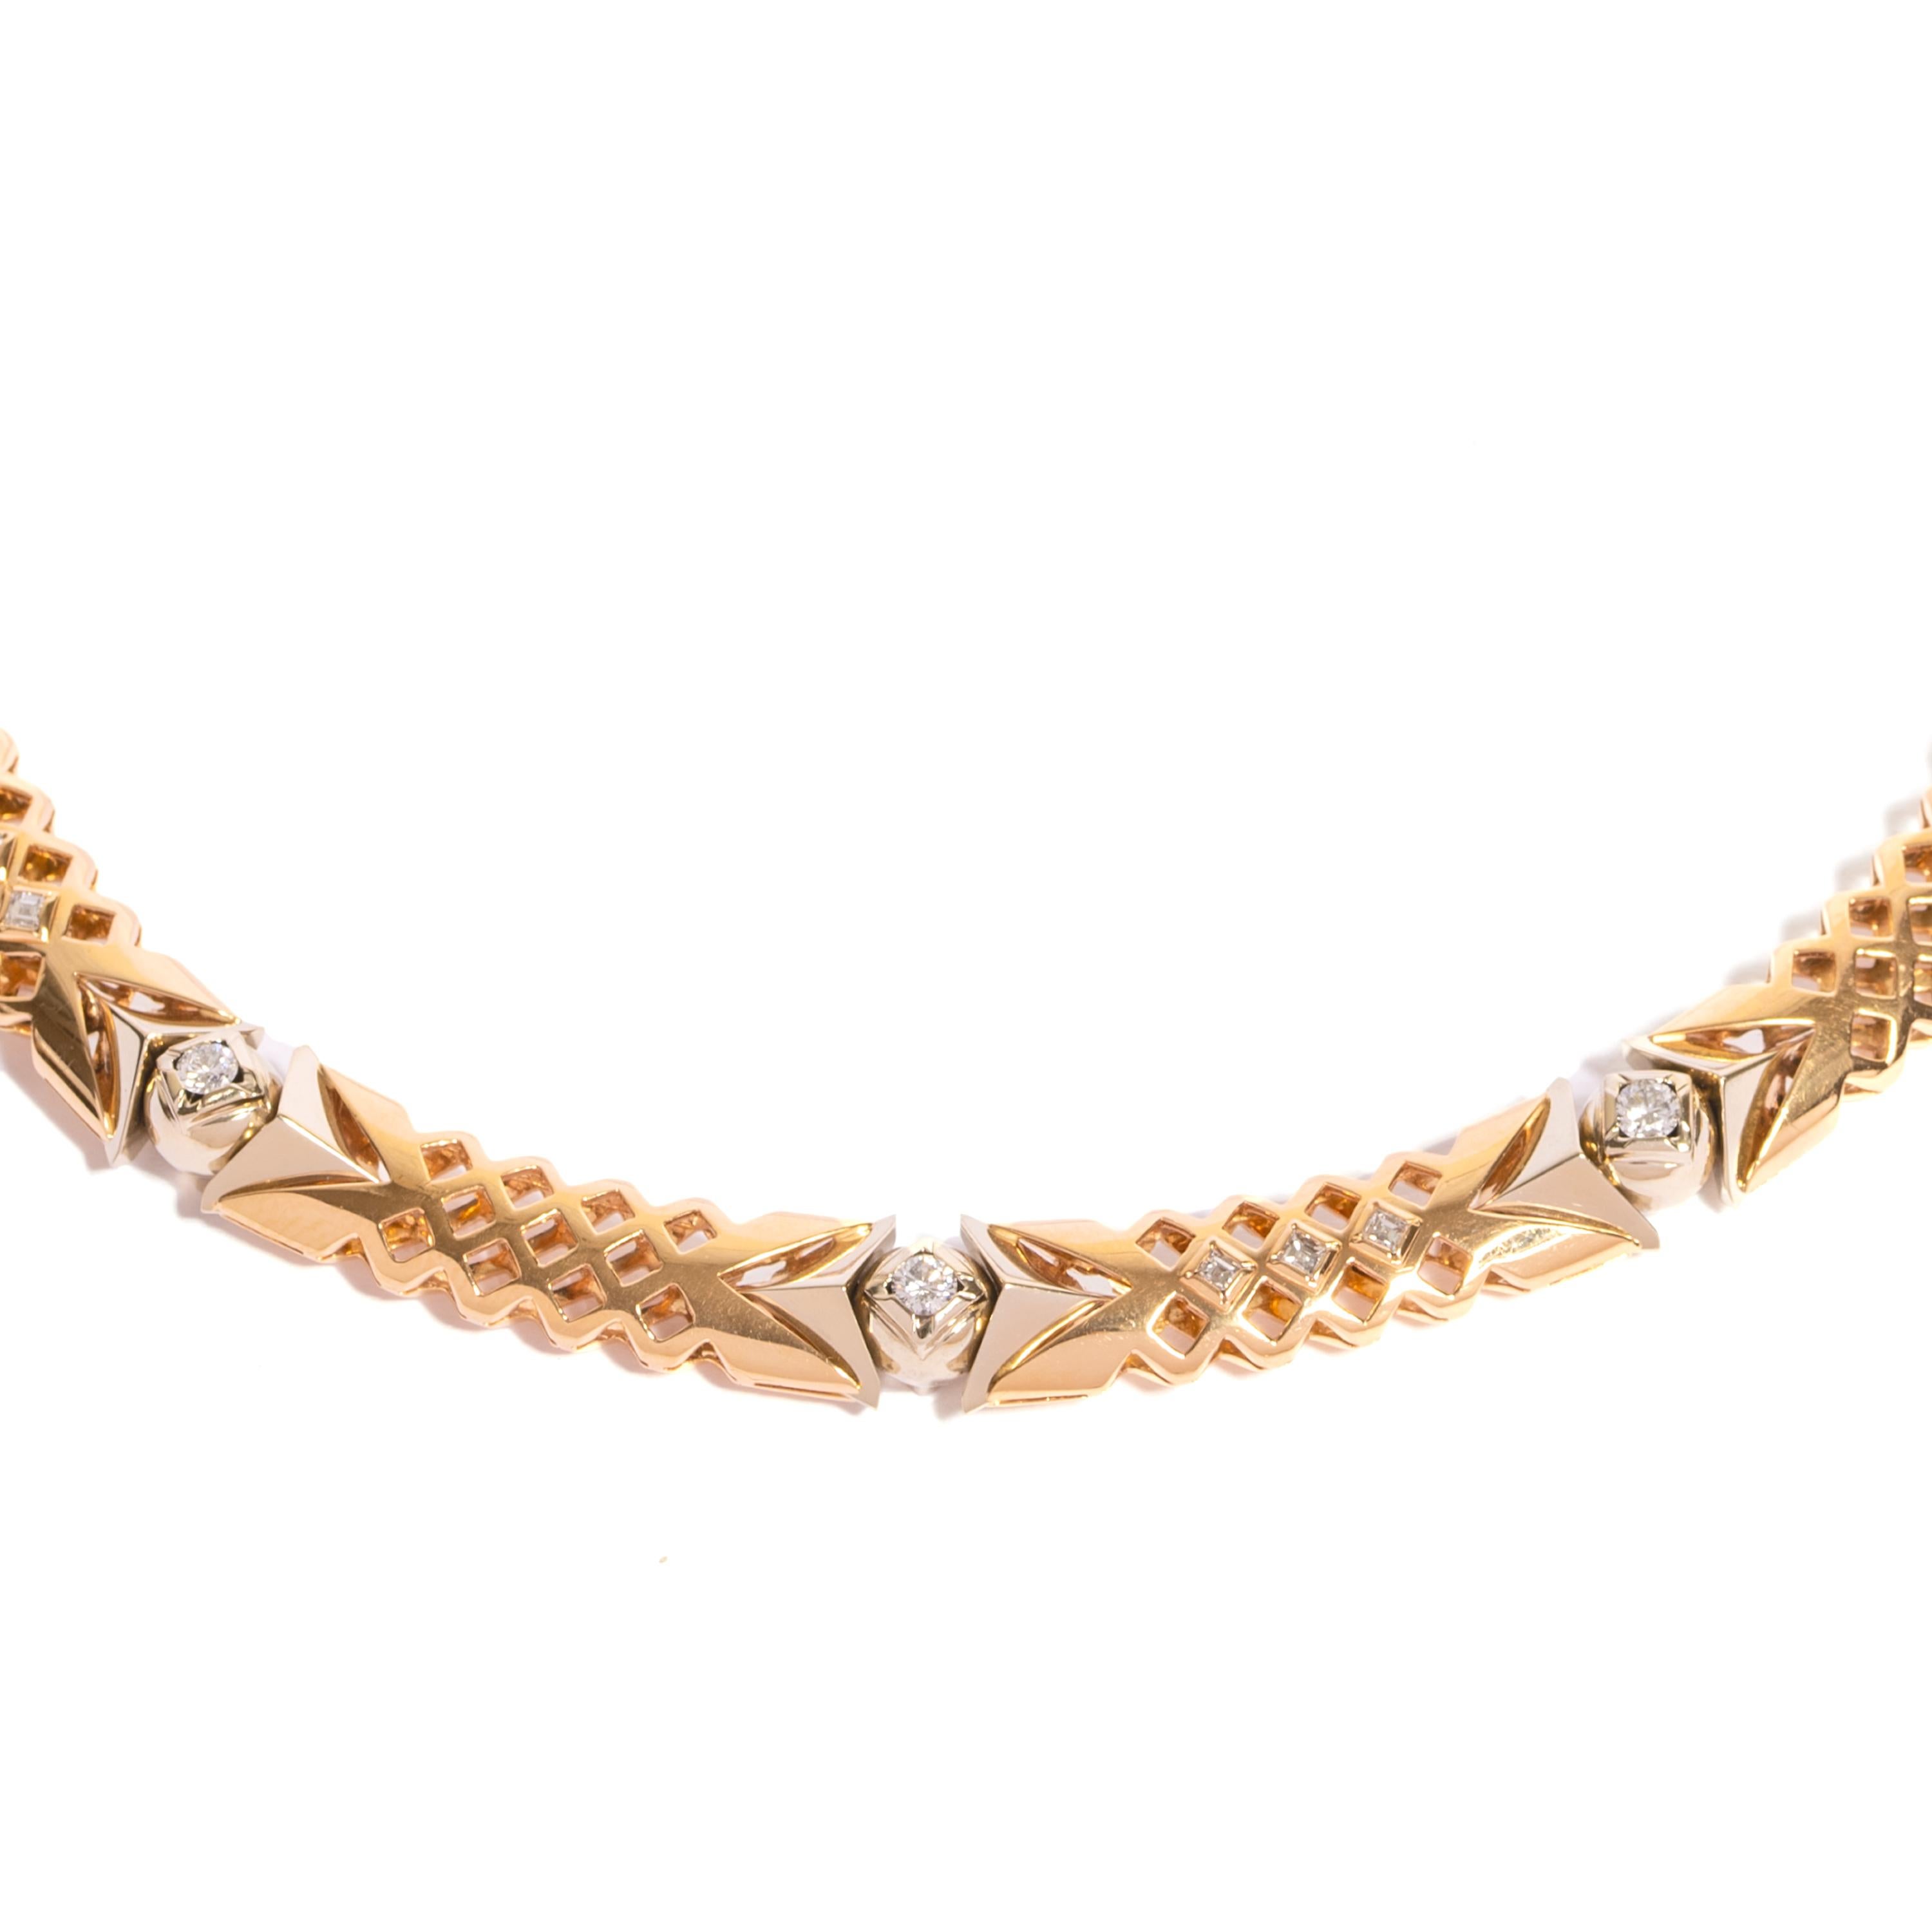 Beautiful necklage by the Italian designer Giancarlo Montebello. The knitted necklace is a unique piece were designed directly for our Enrico Trizio 1868 jewelry. A very elegant yellow gold necklage with 0,57 ct brilliant cut carret and 1.77 ct cut